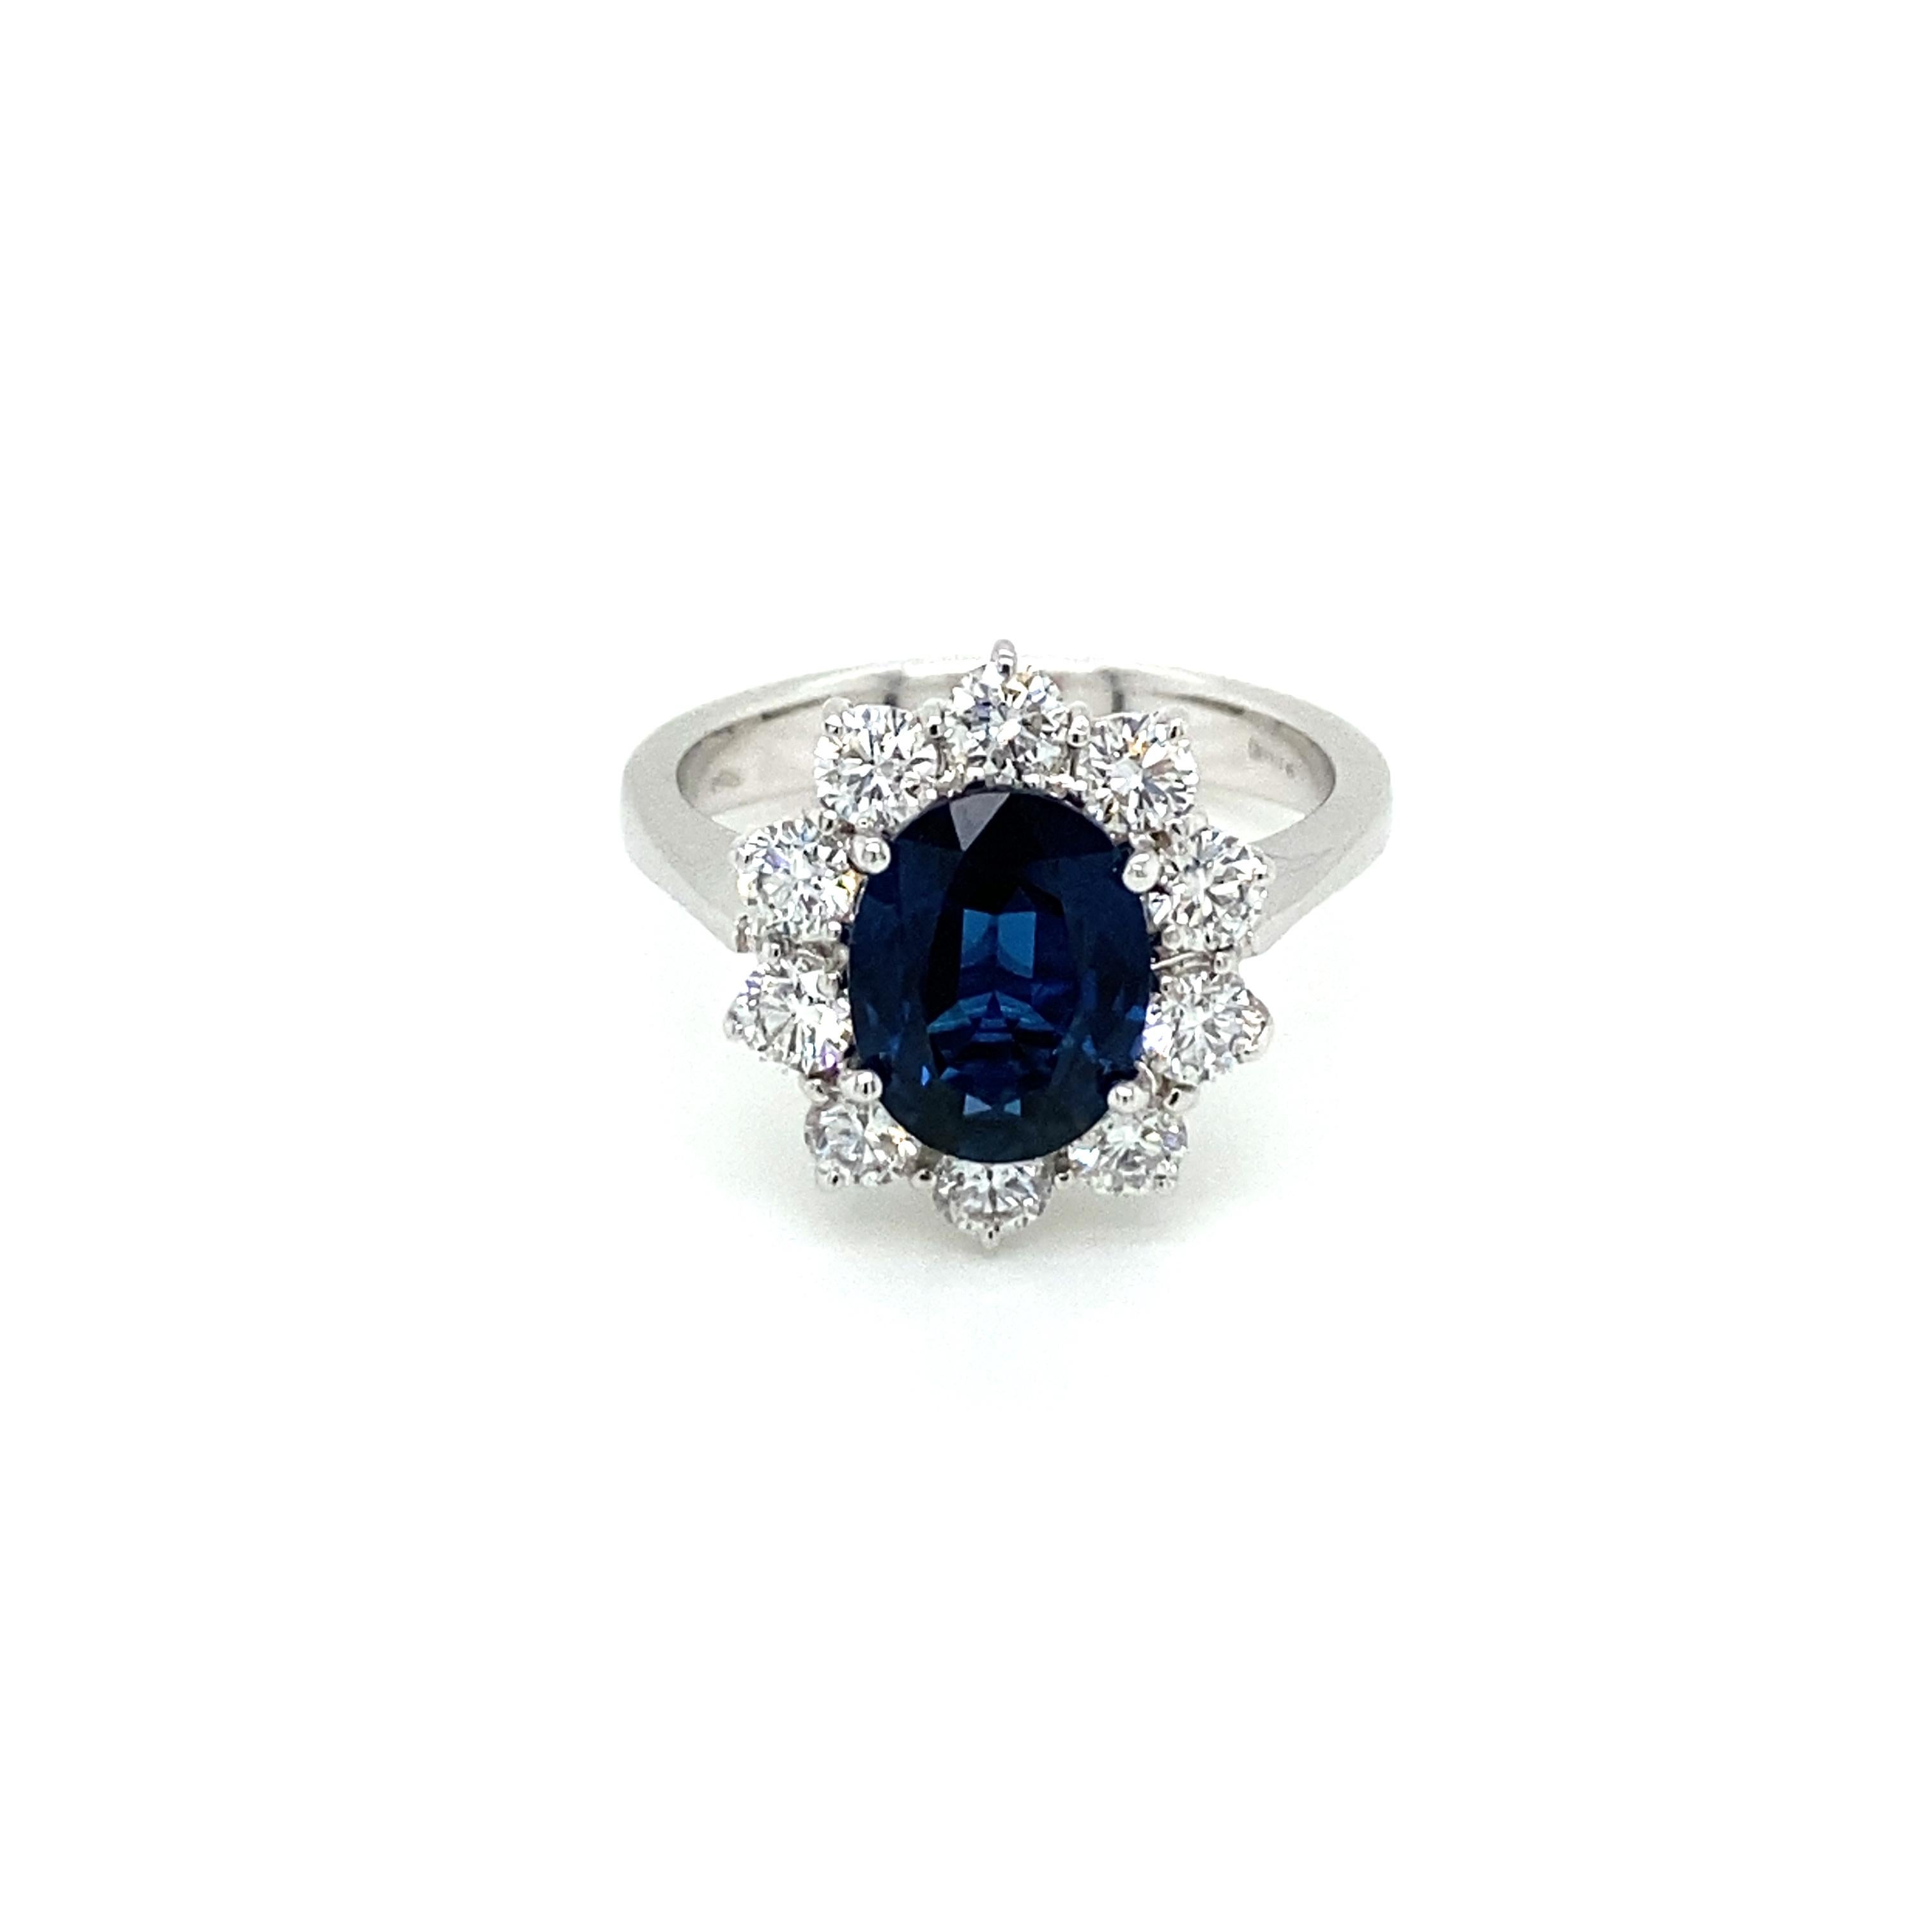 A fine and impressive 18k white Gold, Blue Sapphire and Diamond cluster Ring, set in the center with an oval-cut Natural Burma Sapphire weighing 2.10 carats. The gemstone features vivid color saturation and medium to dark tone with extraordinary